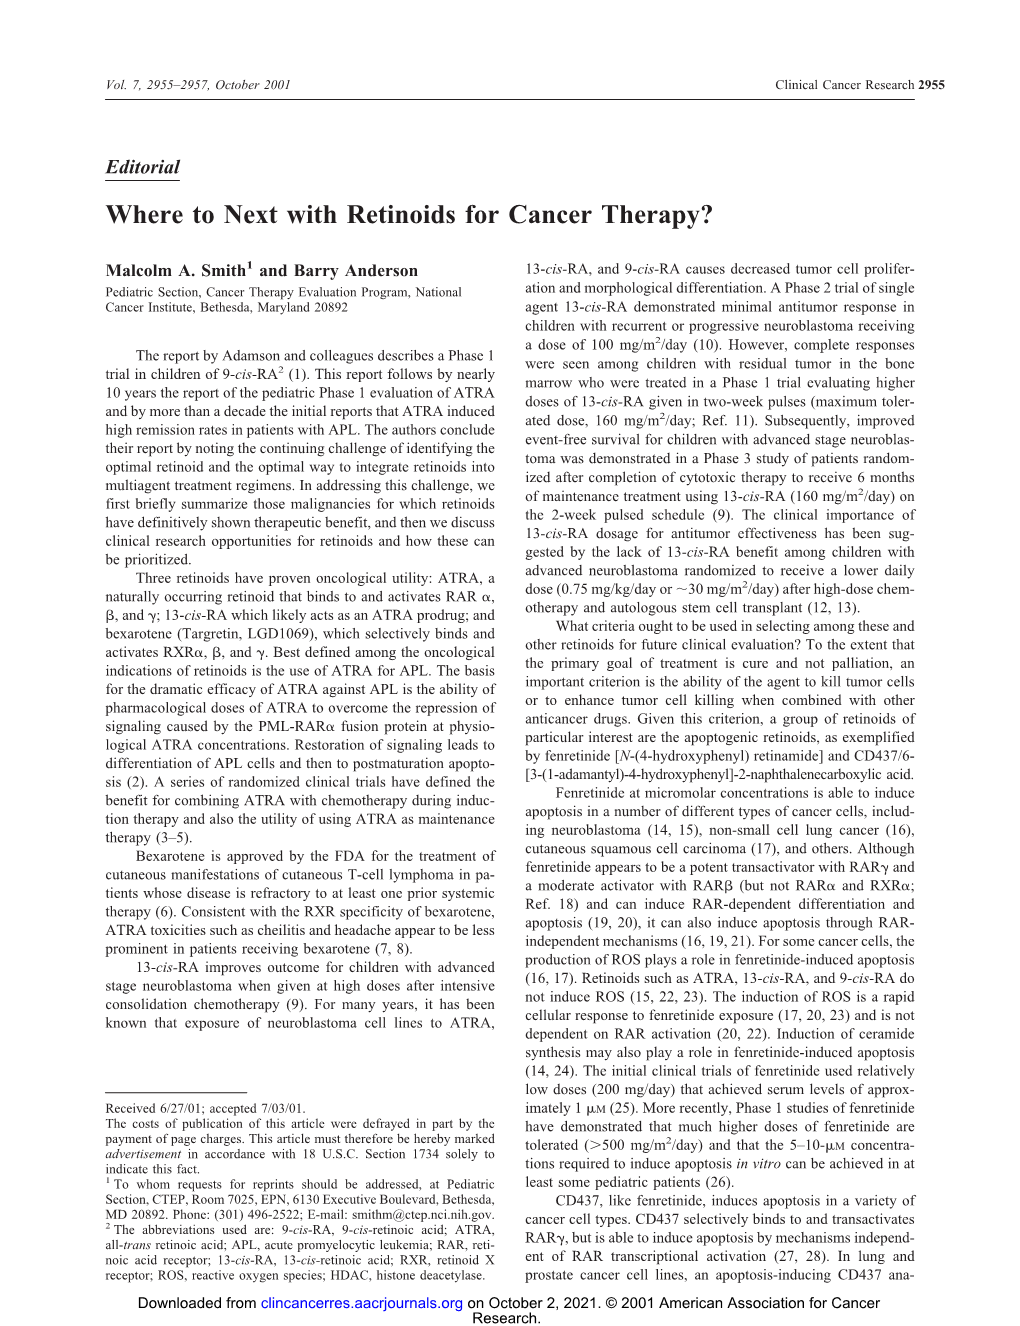 Where to Next with Retinoids for Cancer Therapy?